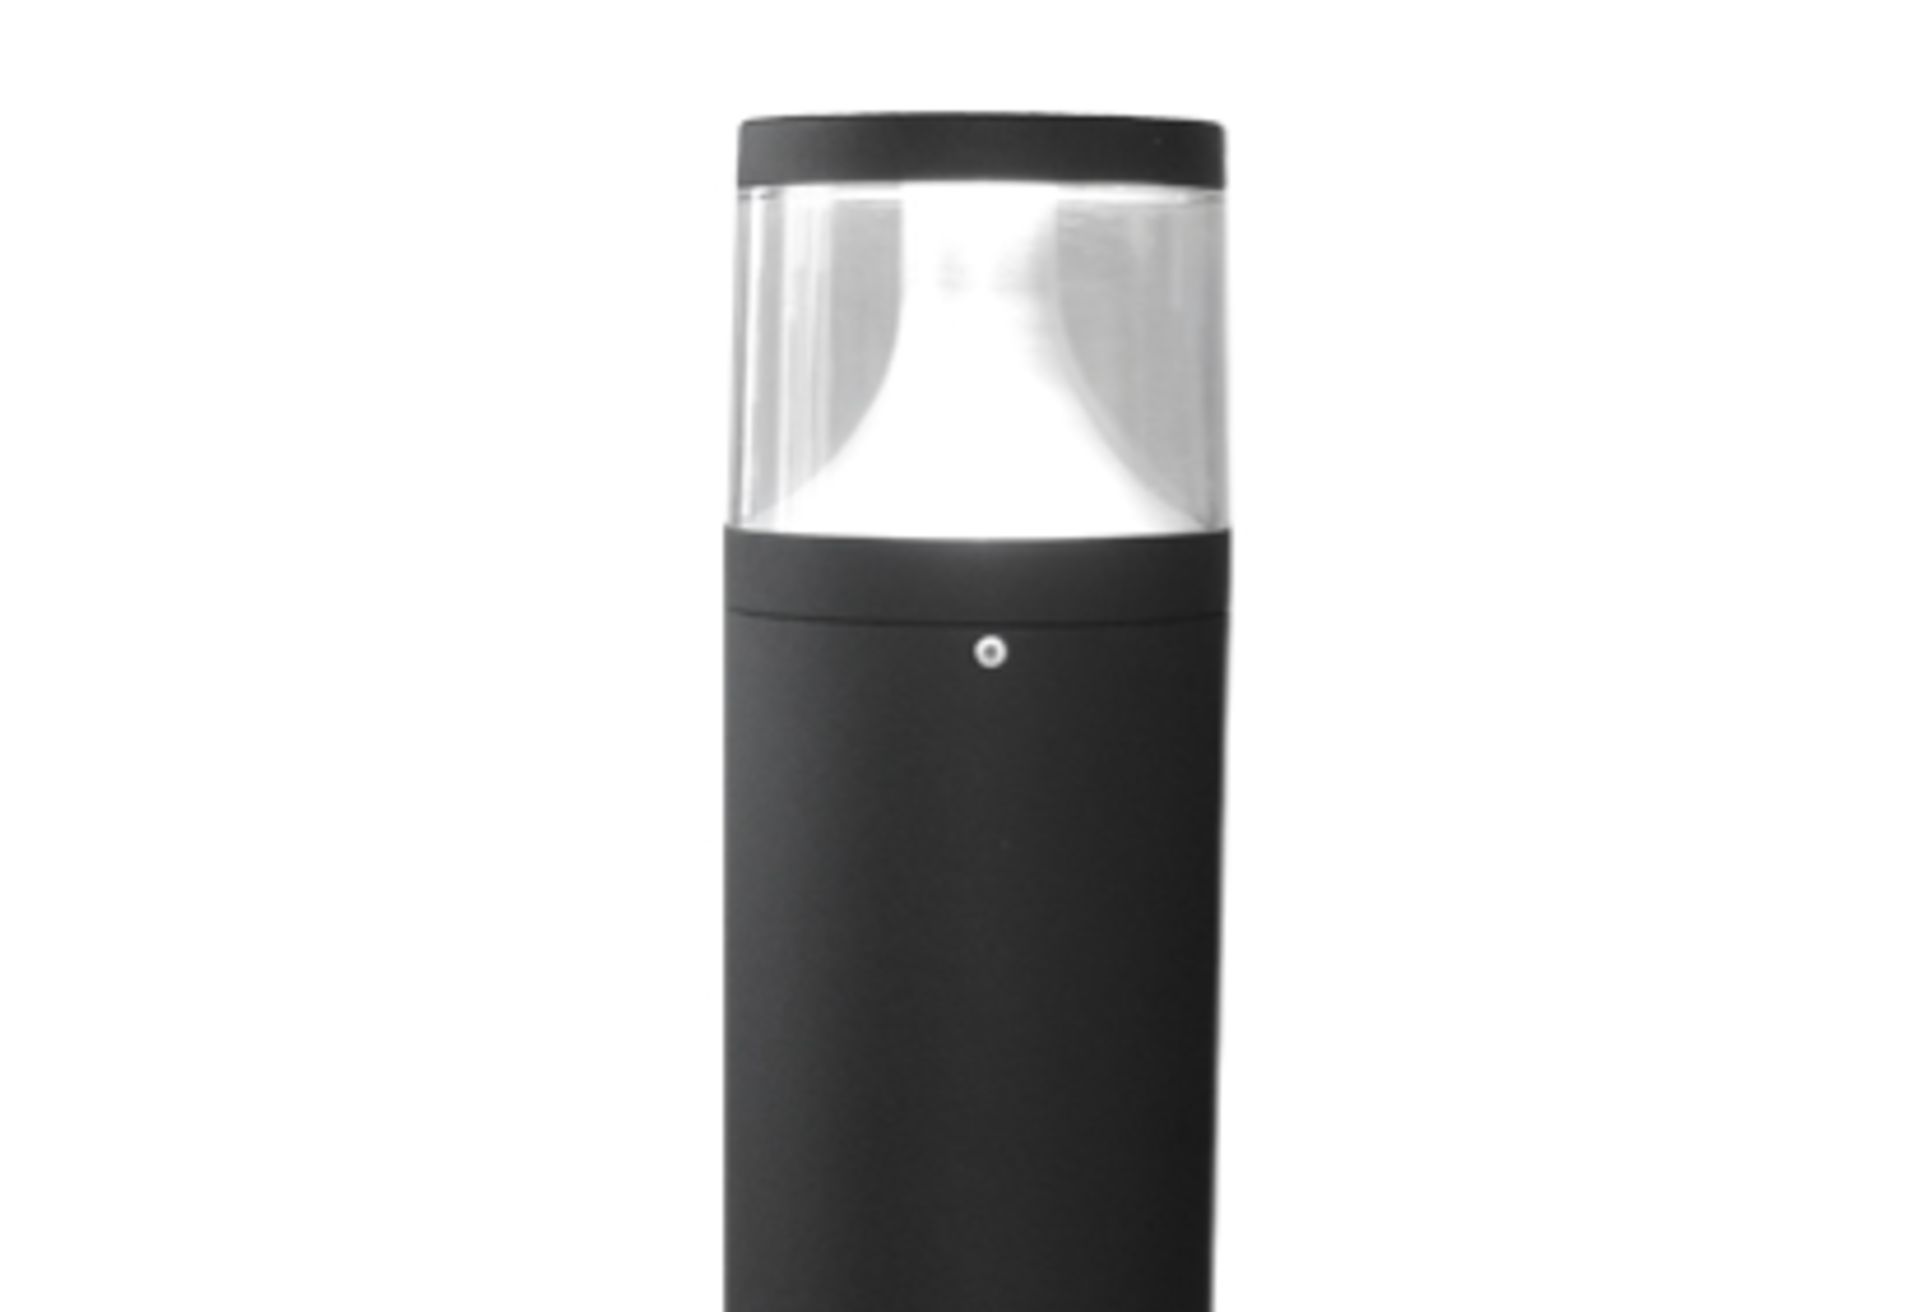 2 20w 1600LM DALI IP65 Waterproof Bollards, colour 3000A, product code T9BOLB1600D30 - Image 6 of 7